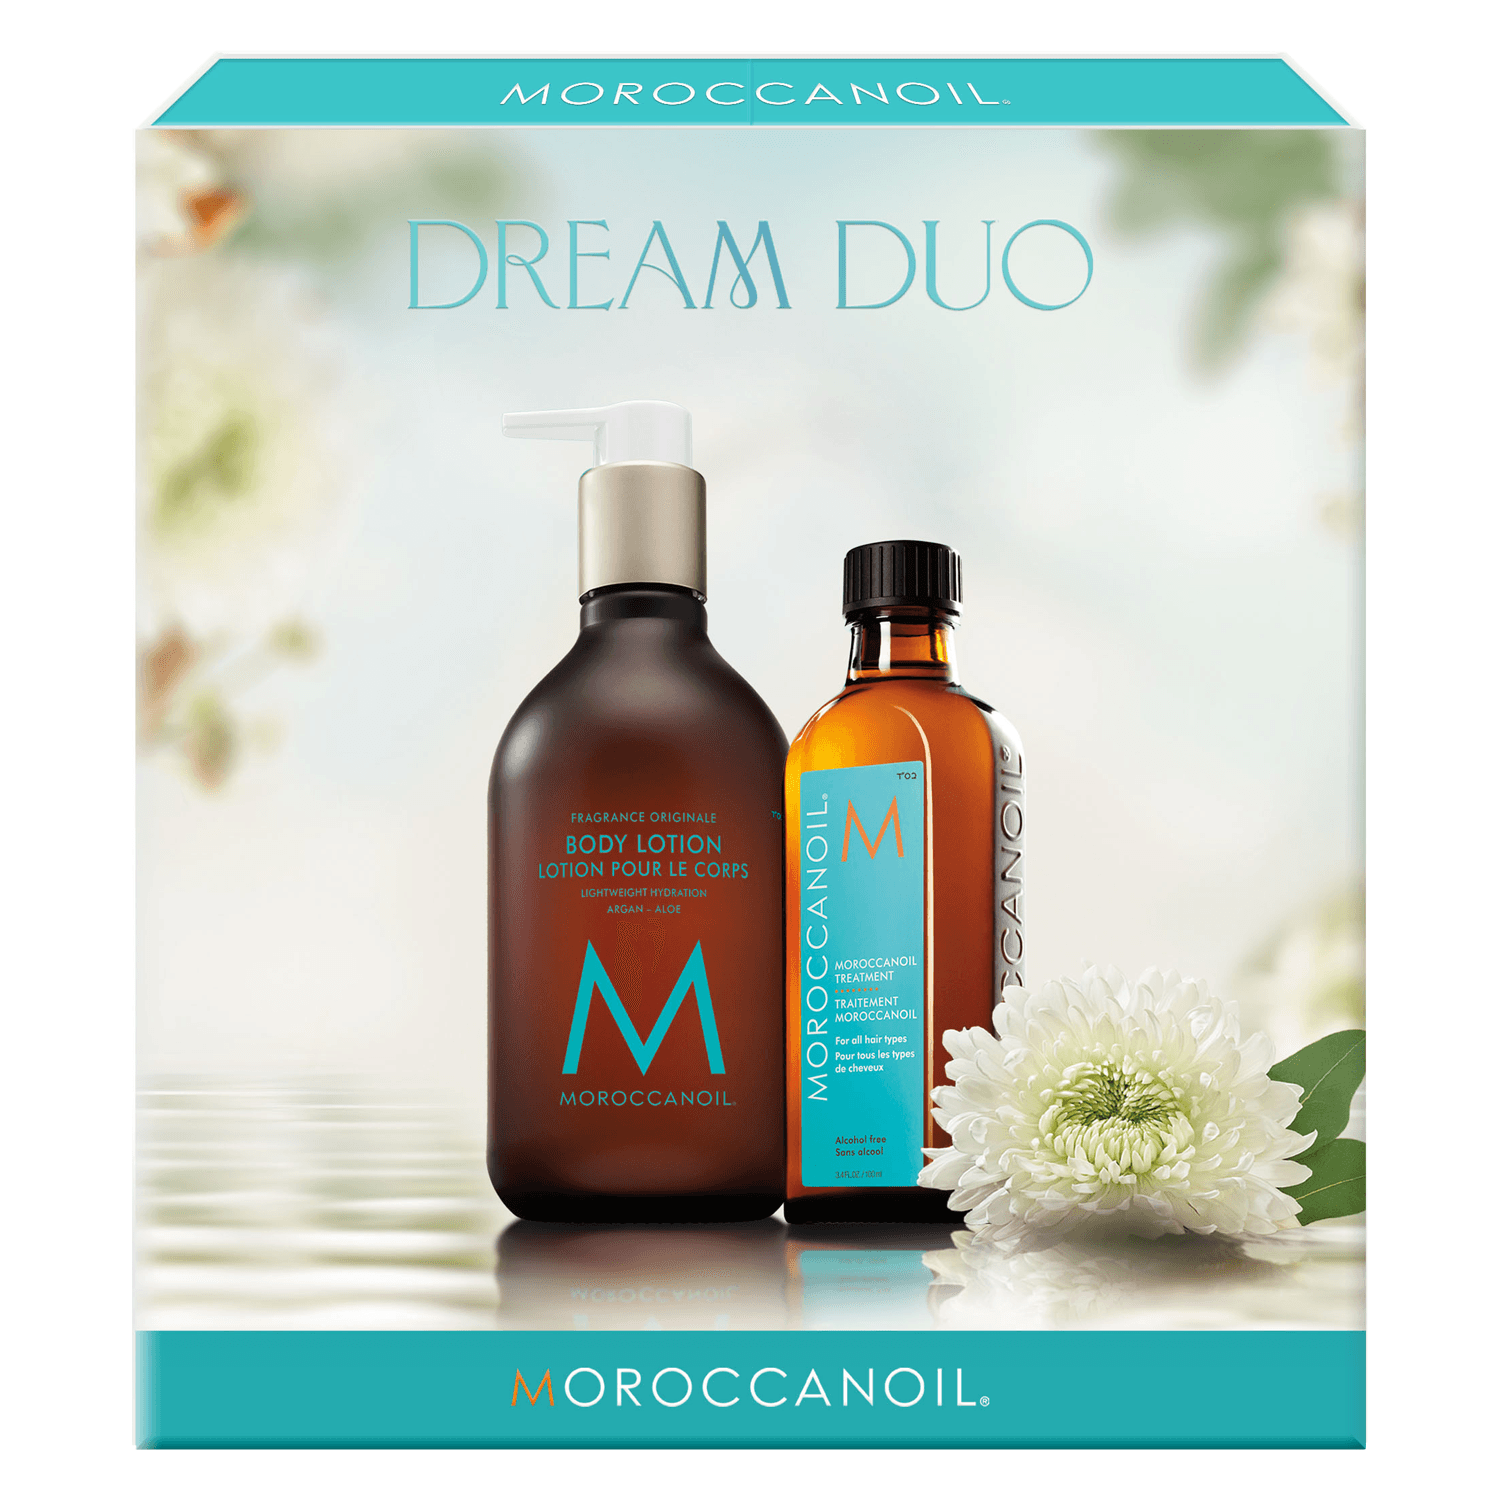 Product image from Moroccanoil - Oil Treatment & Body Lotion Dream Duo